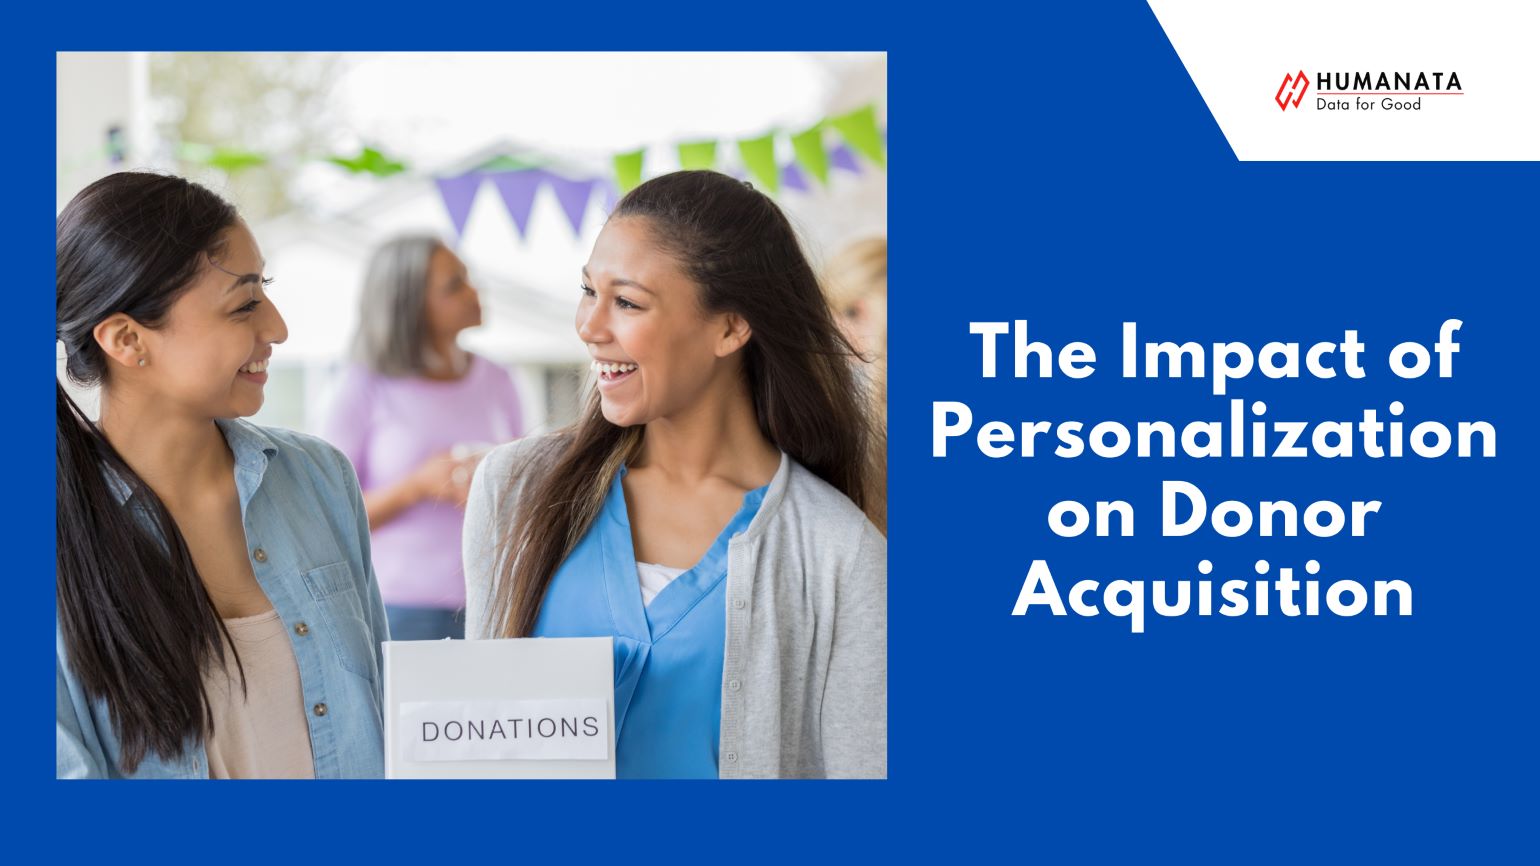 Why Is Personalization Important for Donor Acquisition?